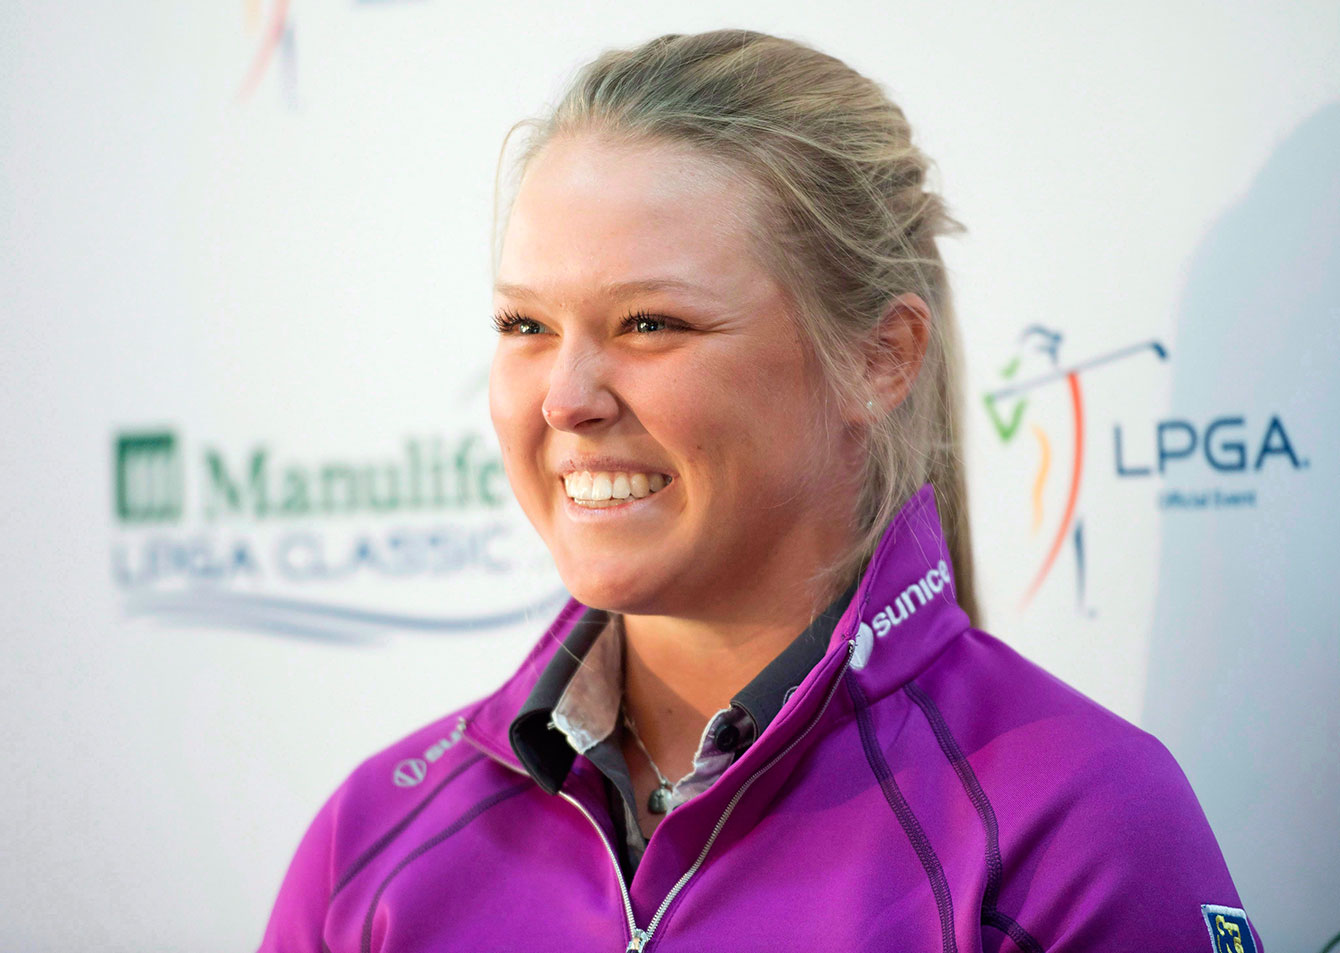 Henderson withdrew from the Pan Am Games to focus on earning LPGA Tour membership. 